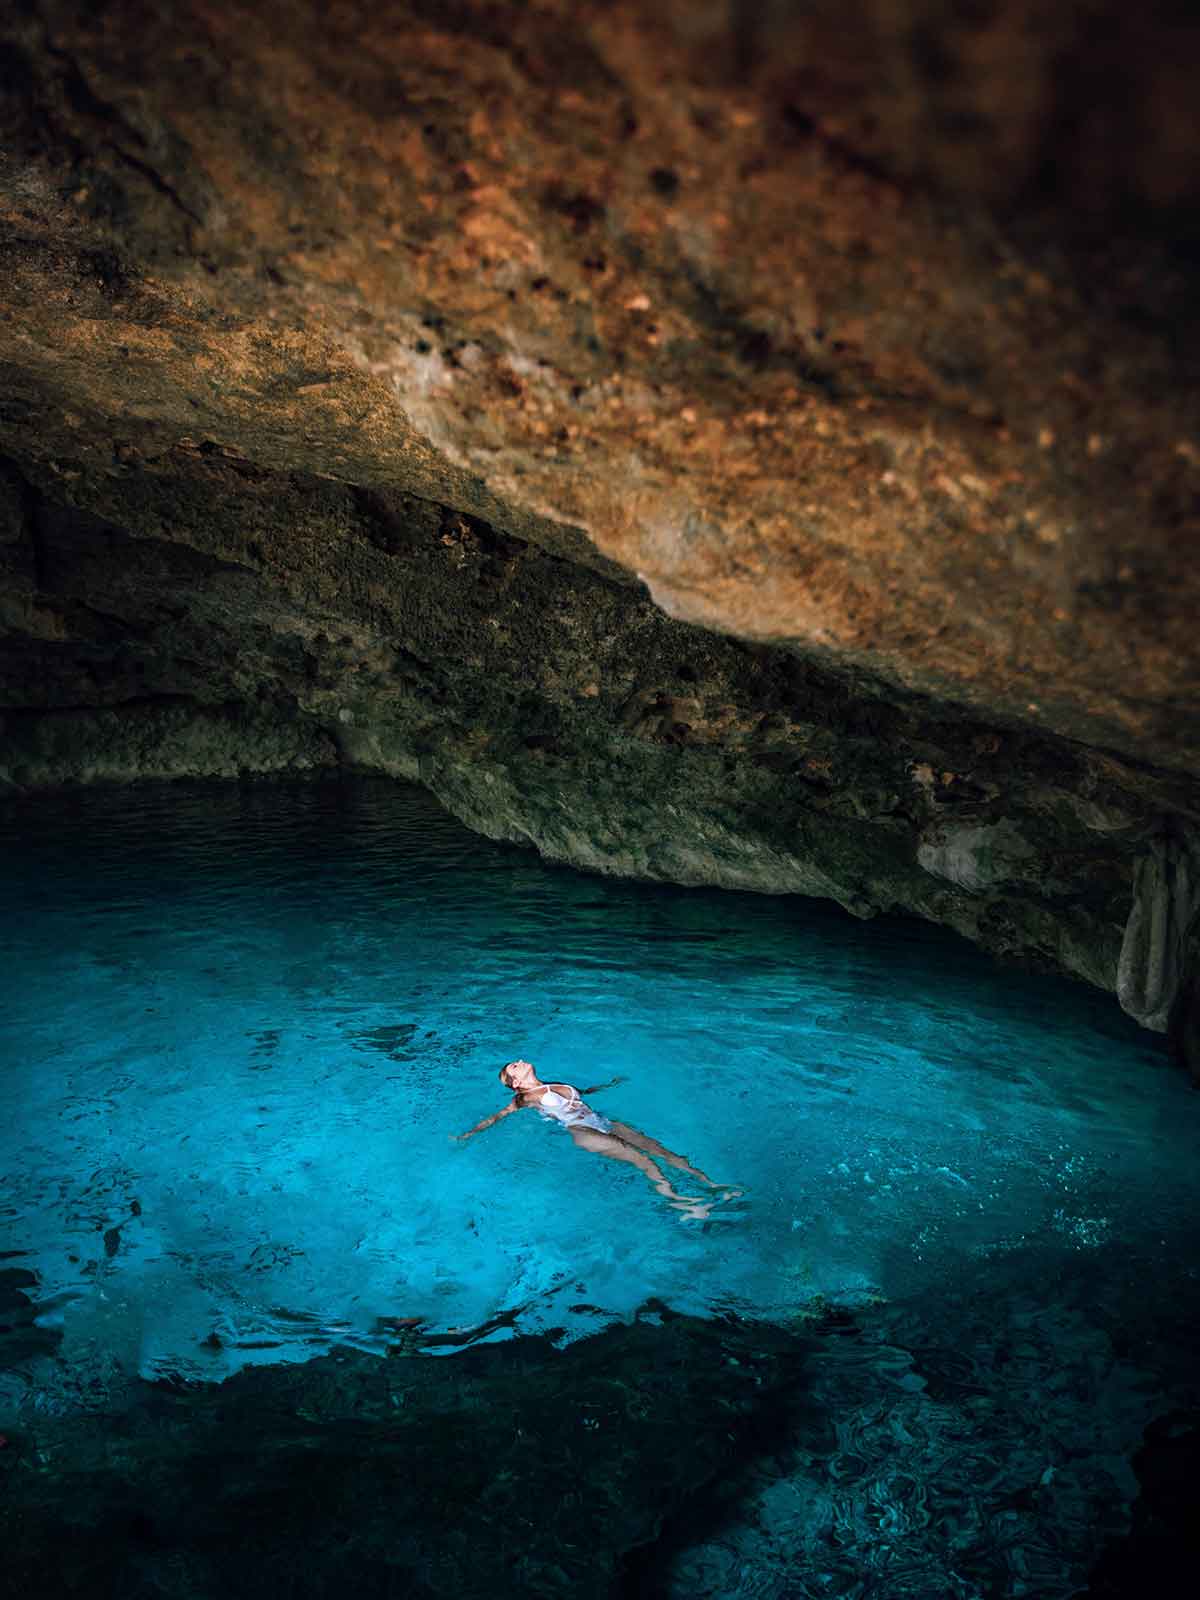 Mexico is abundant with cenotes or natural sink holes